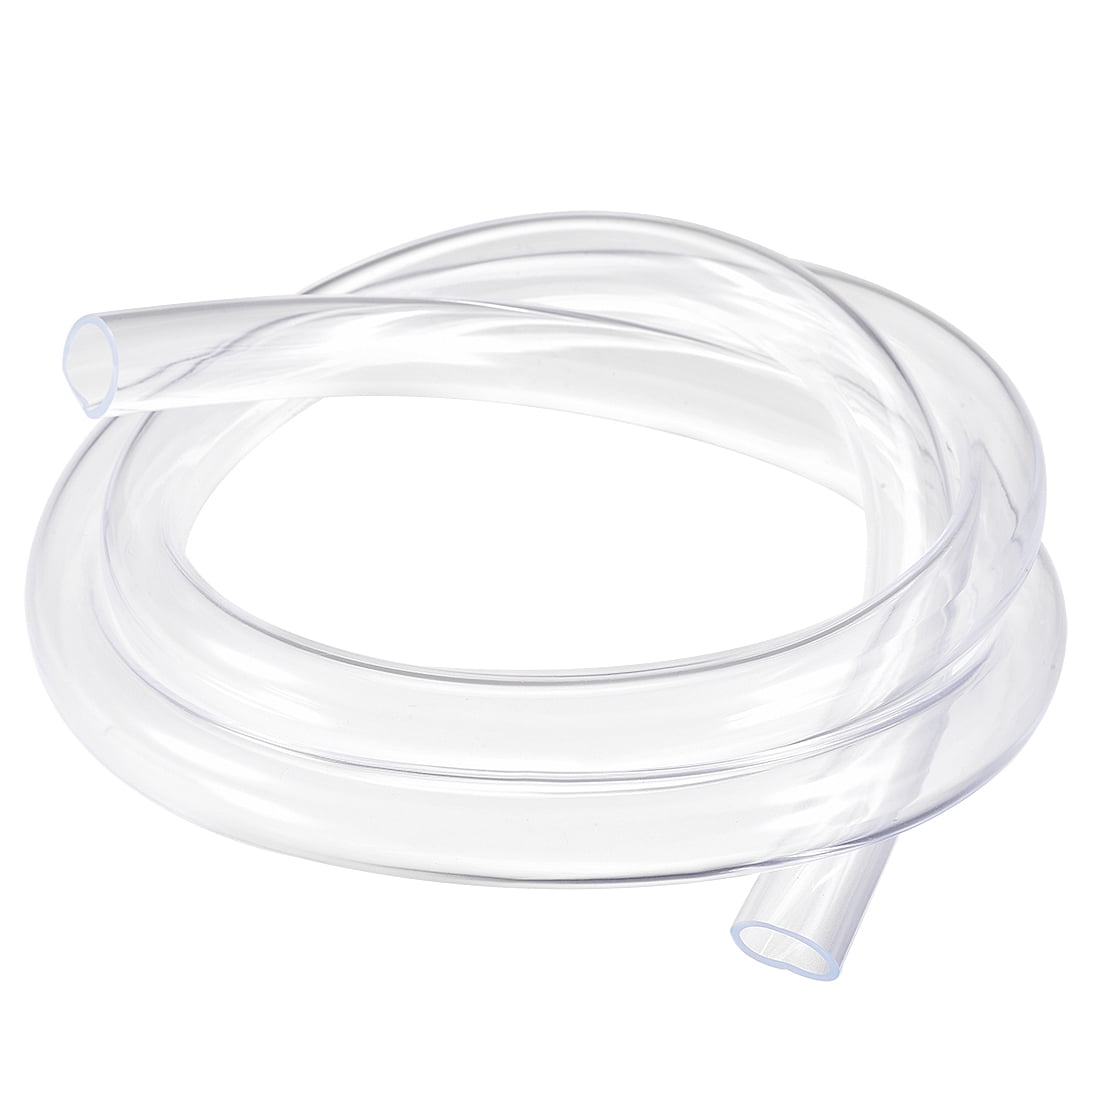 3mm Clear Plastic Flexible Non Toxic PVC Hose Tube Water Screen 1mm wall 1mtr 